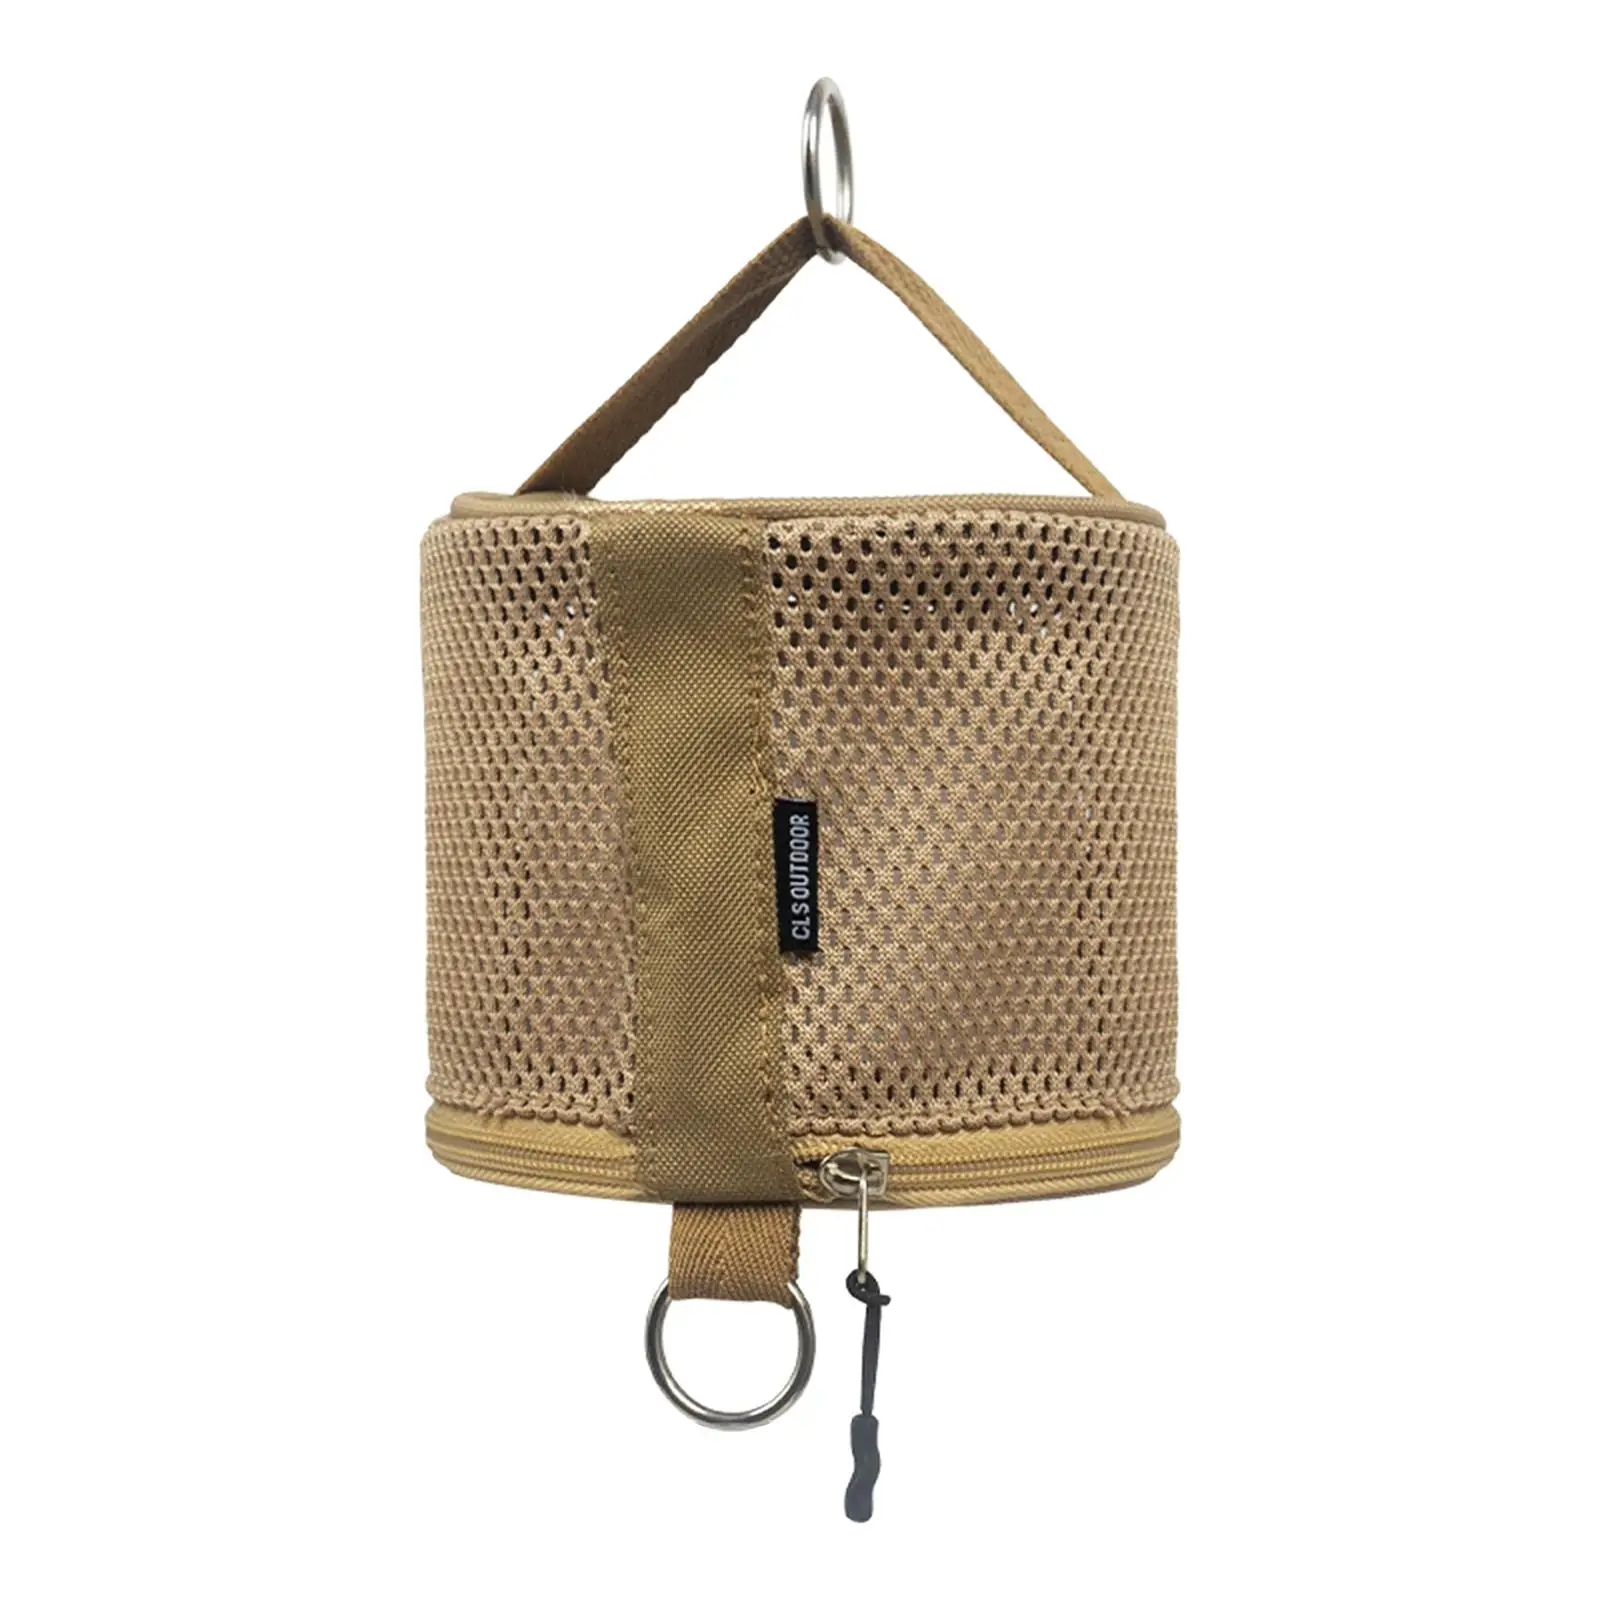 Outdoor Toilet Paper Holder Wipe Dispenser with Metal Rings Portable Hanging Paper Roll Holder Tissue Dispenser for Hiking Tent